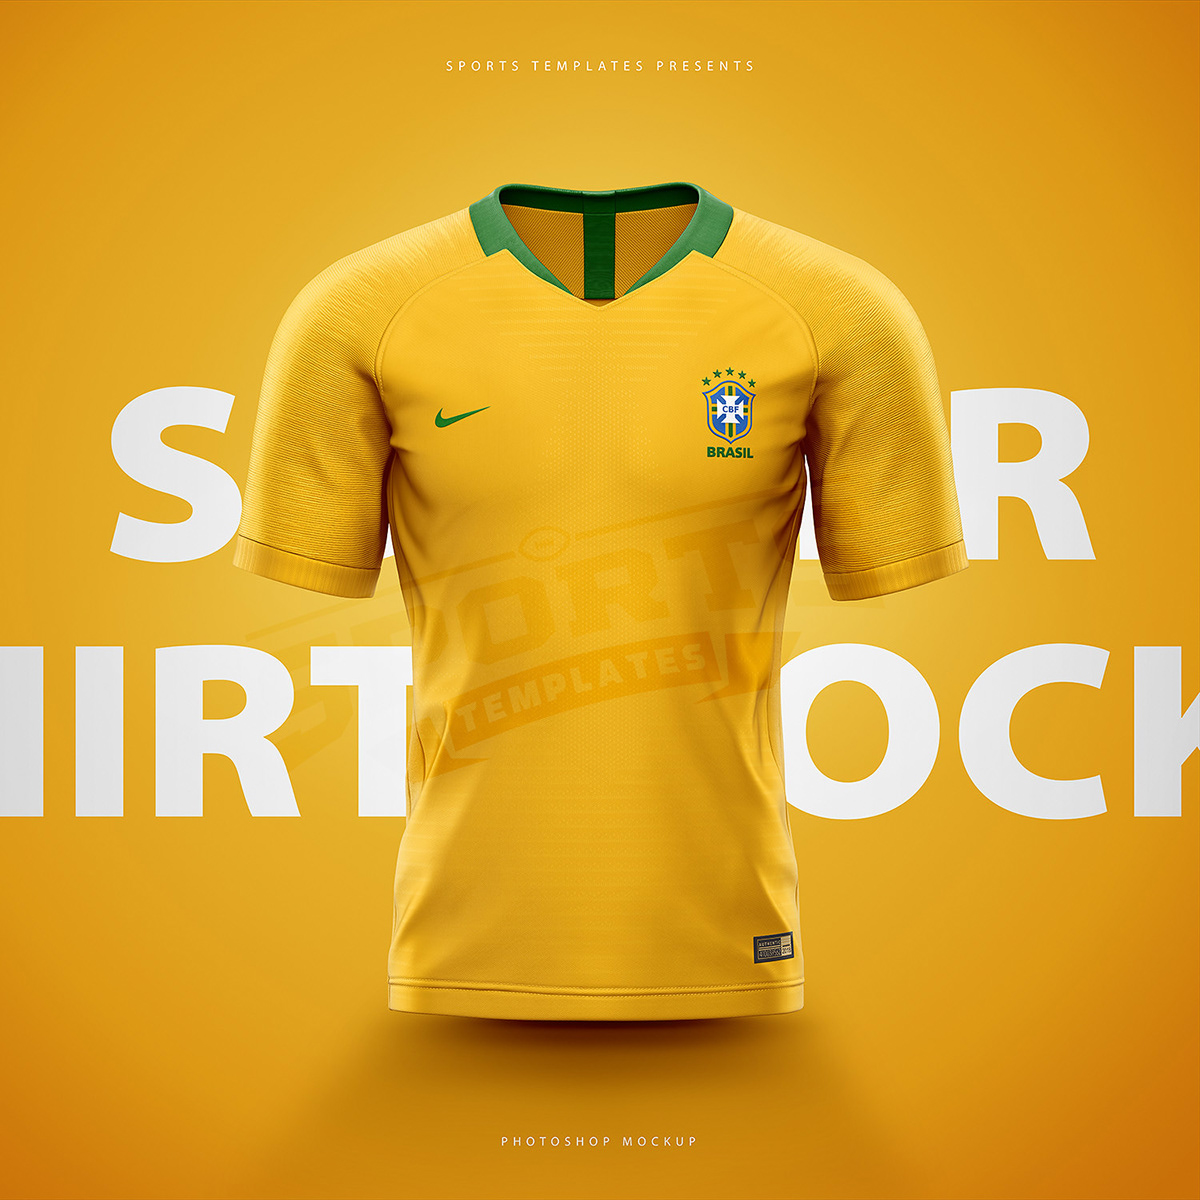 Download Fifa world cup 2018 football shirt/jersey builder psd on Pantone Canvas Gallery